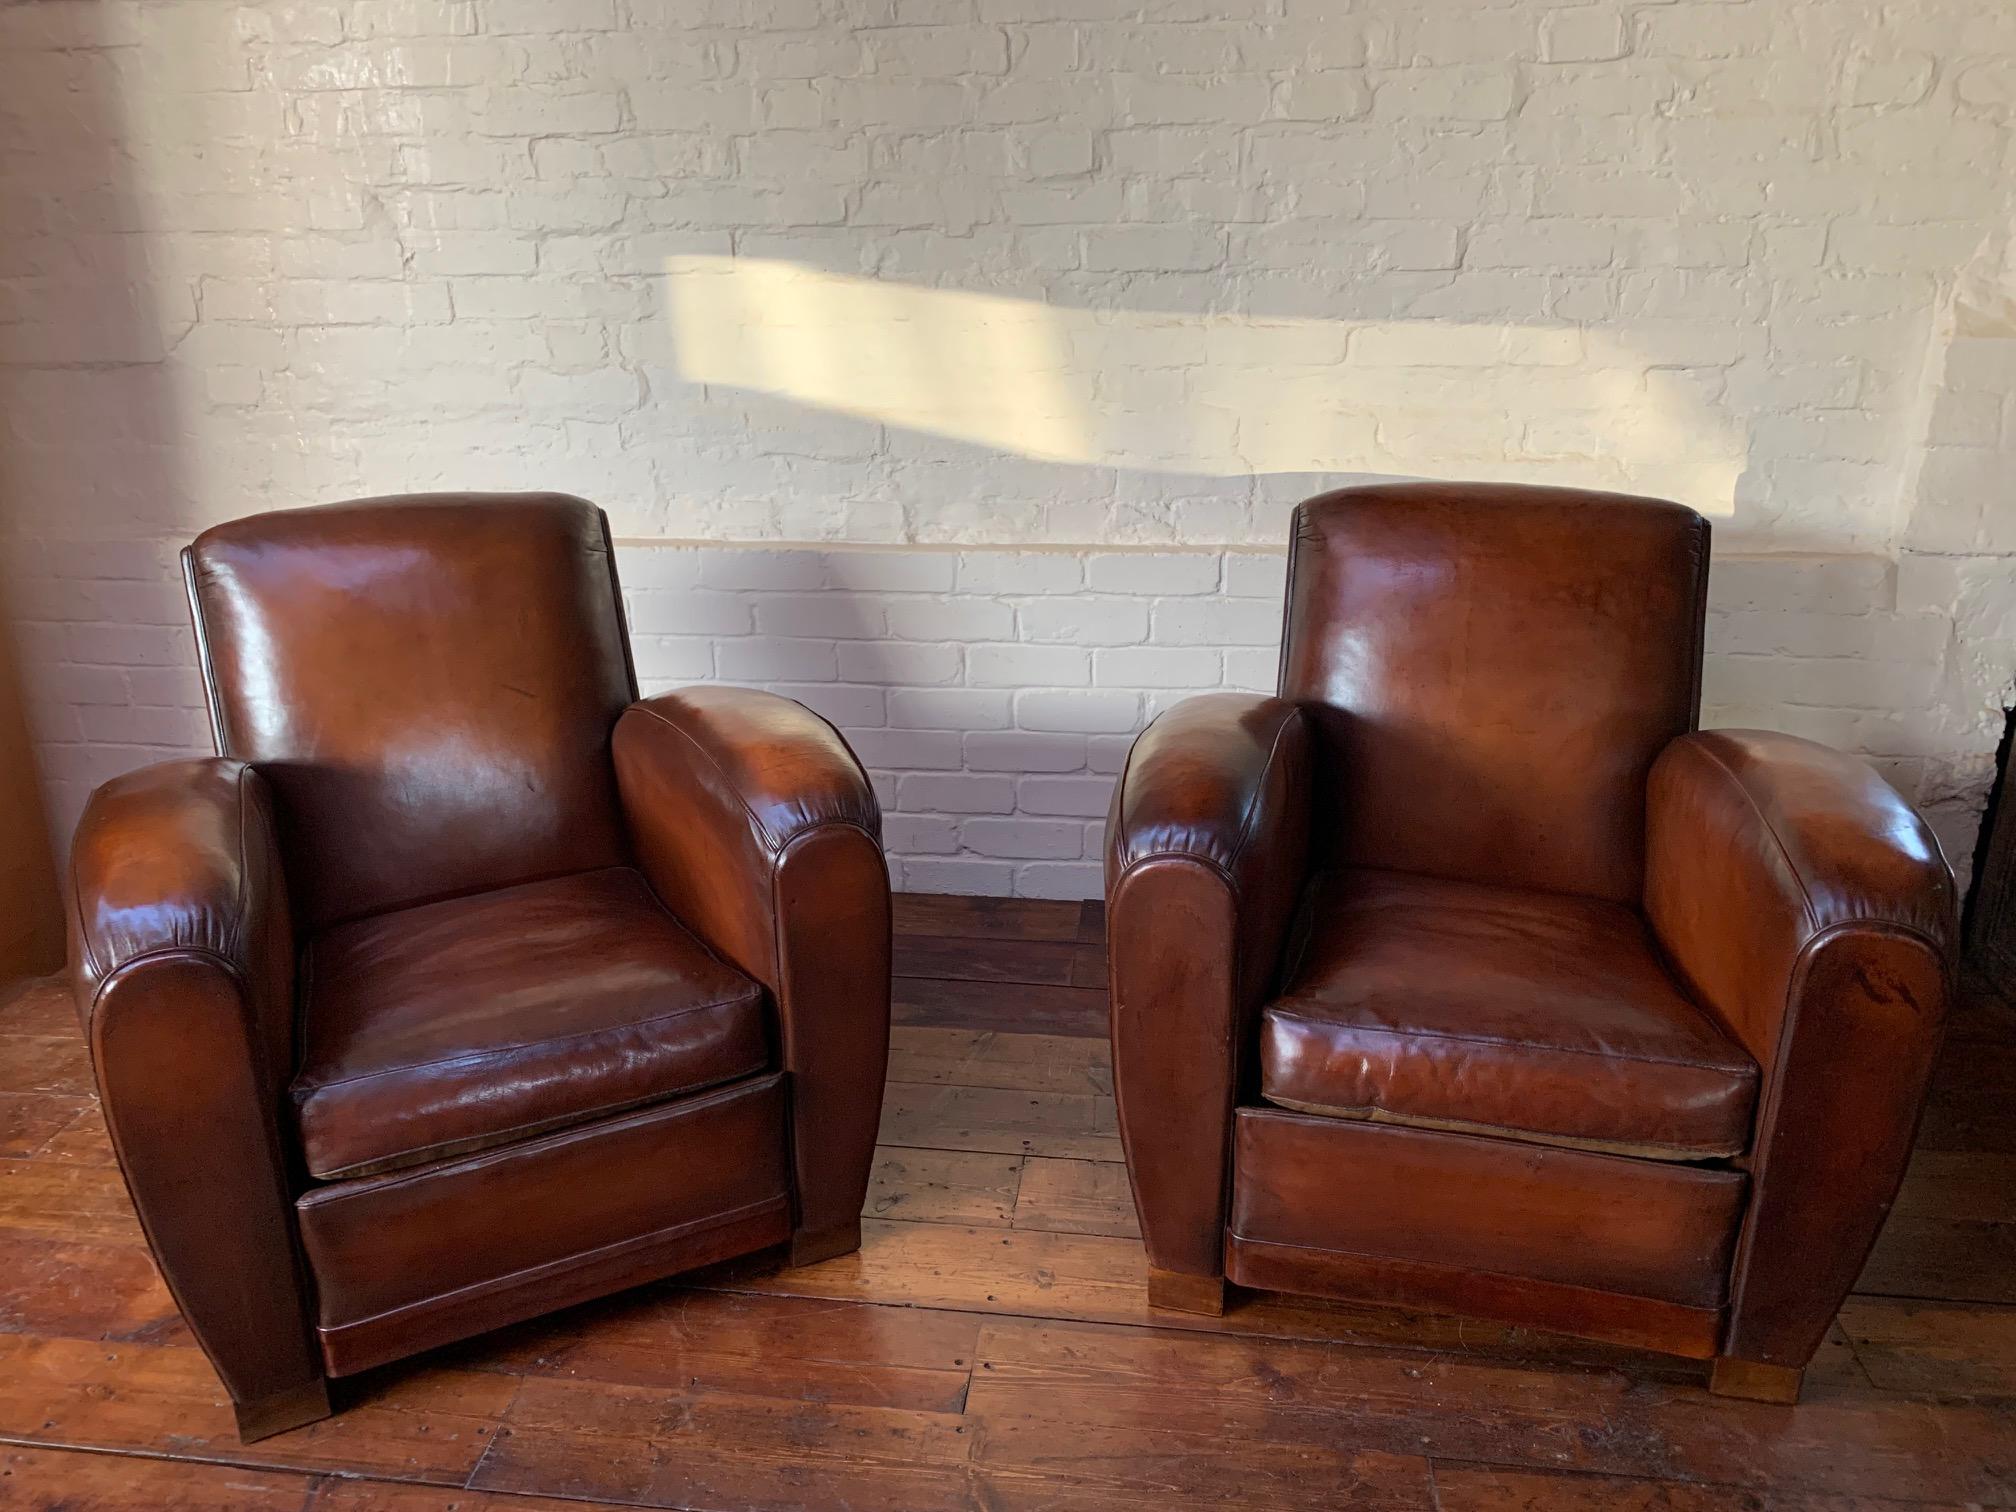 This is a beautiful pair of original French Leather club chairs. The original Havana brown leather has been preserved beautifully and through areas of wear now reveal the loveliest of chestnut hues. Fast approaching 80 years, these chairs have been